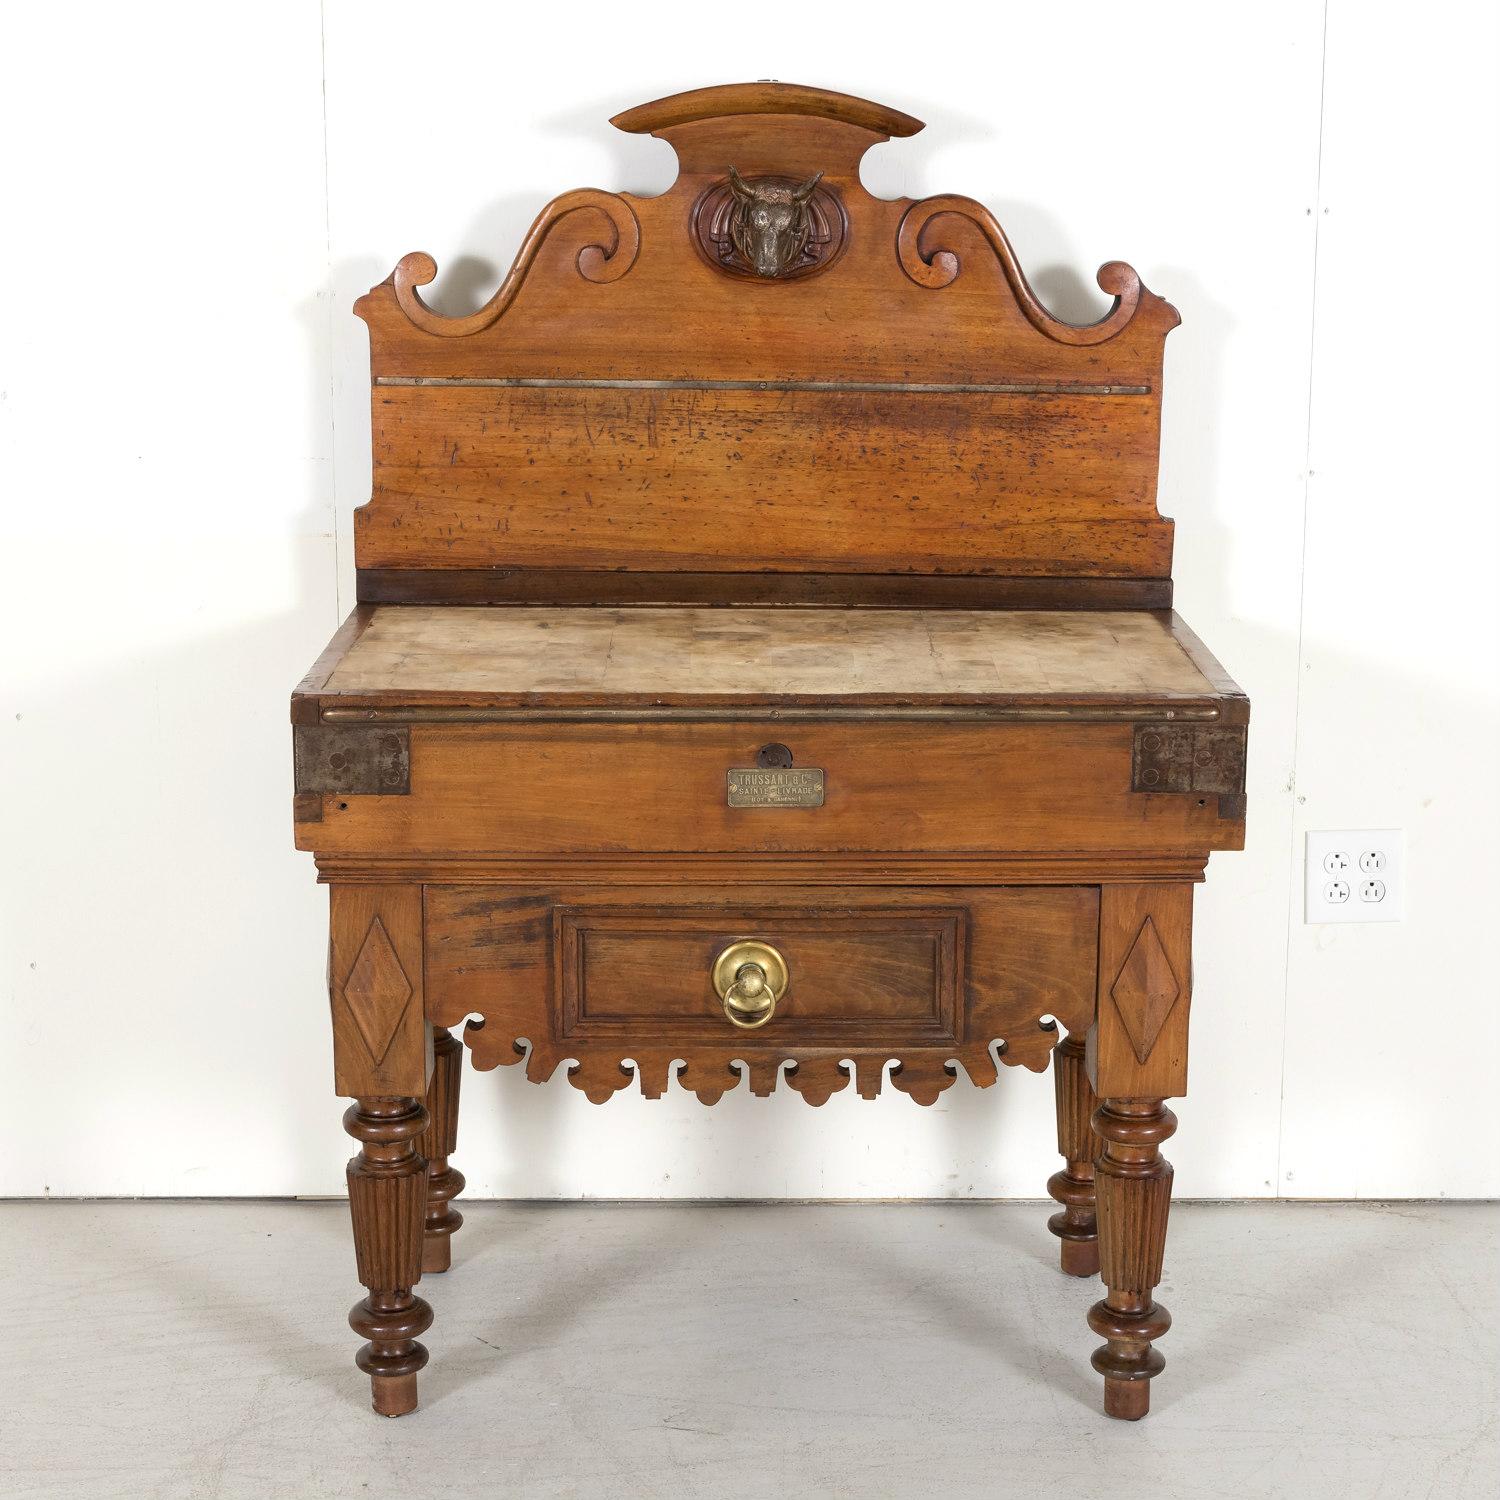 A fabulous, authentic 19th century French billot de boucher or butcher block, circa 1890s, handcrafted of mixed woods including maple by Trussant & Cie in Sainte-Livrade sur Lot for a boucherie in Lyon, having a shaped and removable backsplash with